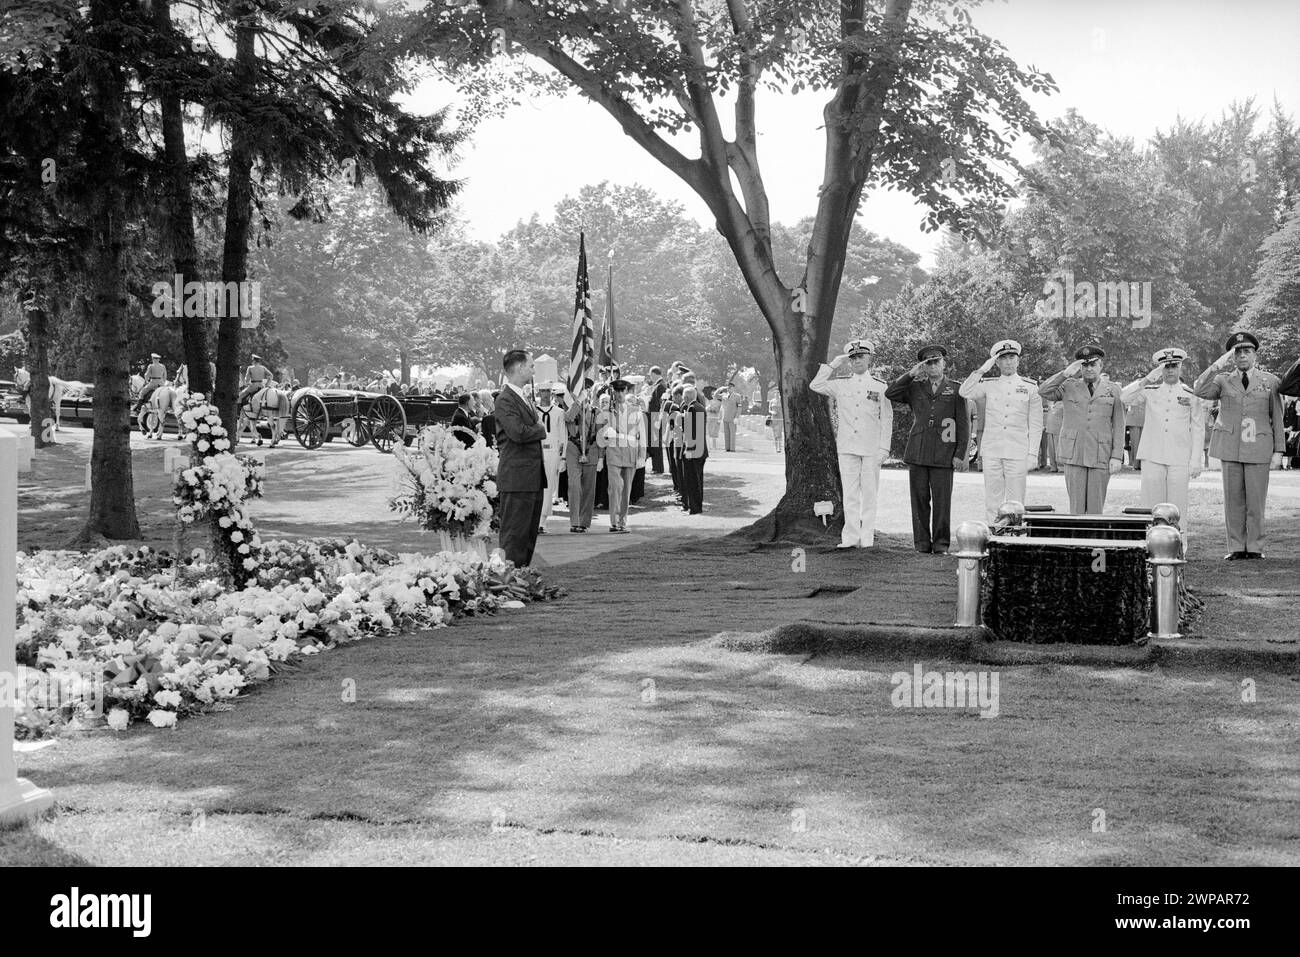 People at gravesite of John Foster Dulles during his burial, Arlington National Cemetery,  Arlington, Virginia, USA, John T. Bledsoe, U.S. News & World Report Magazine Photograph Collection, May 27, 1959 Stock Photo